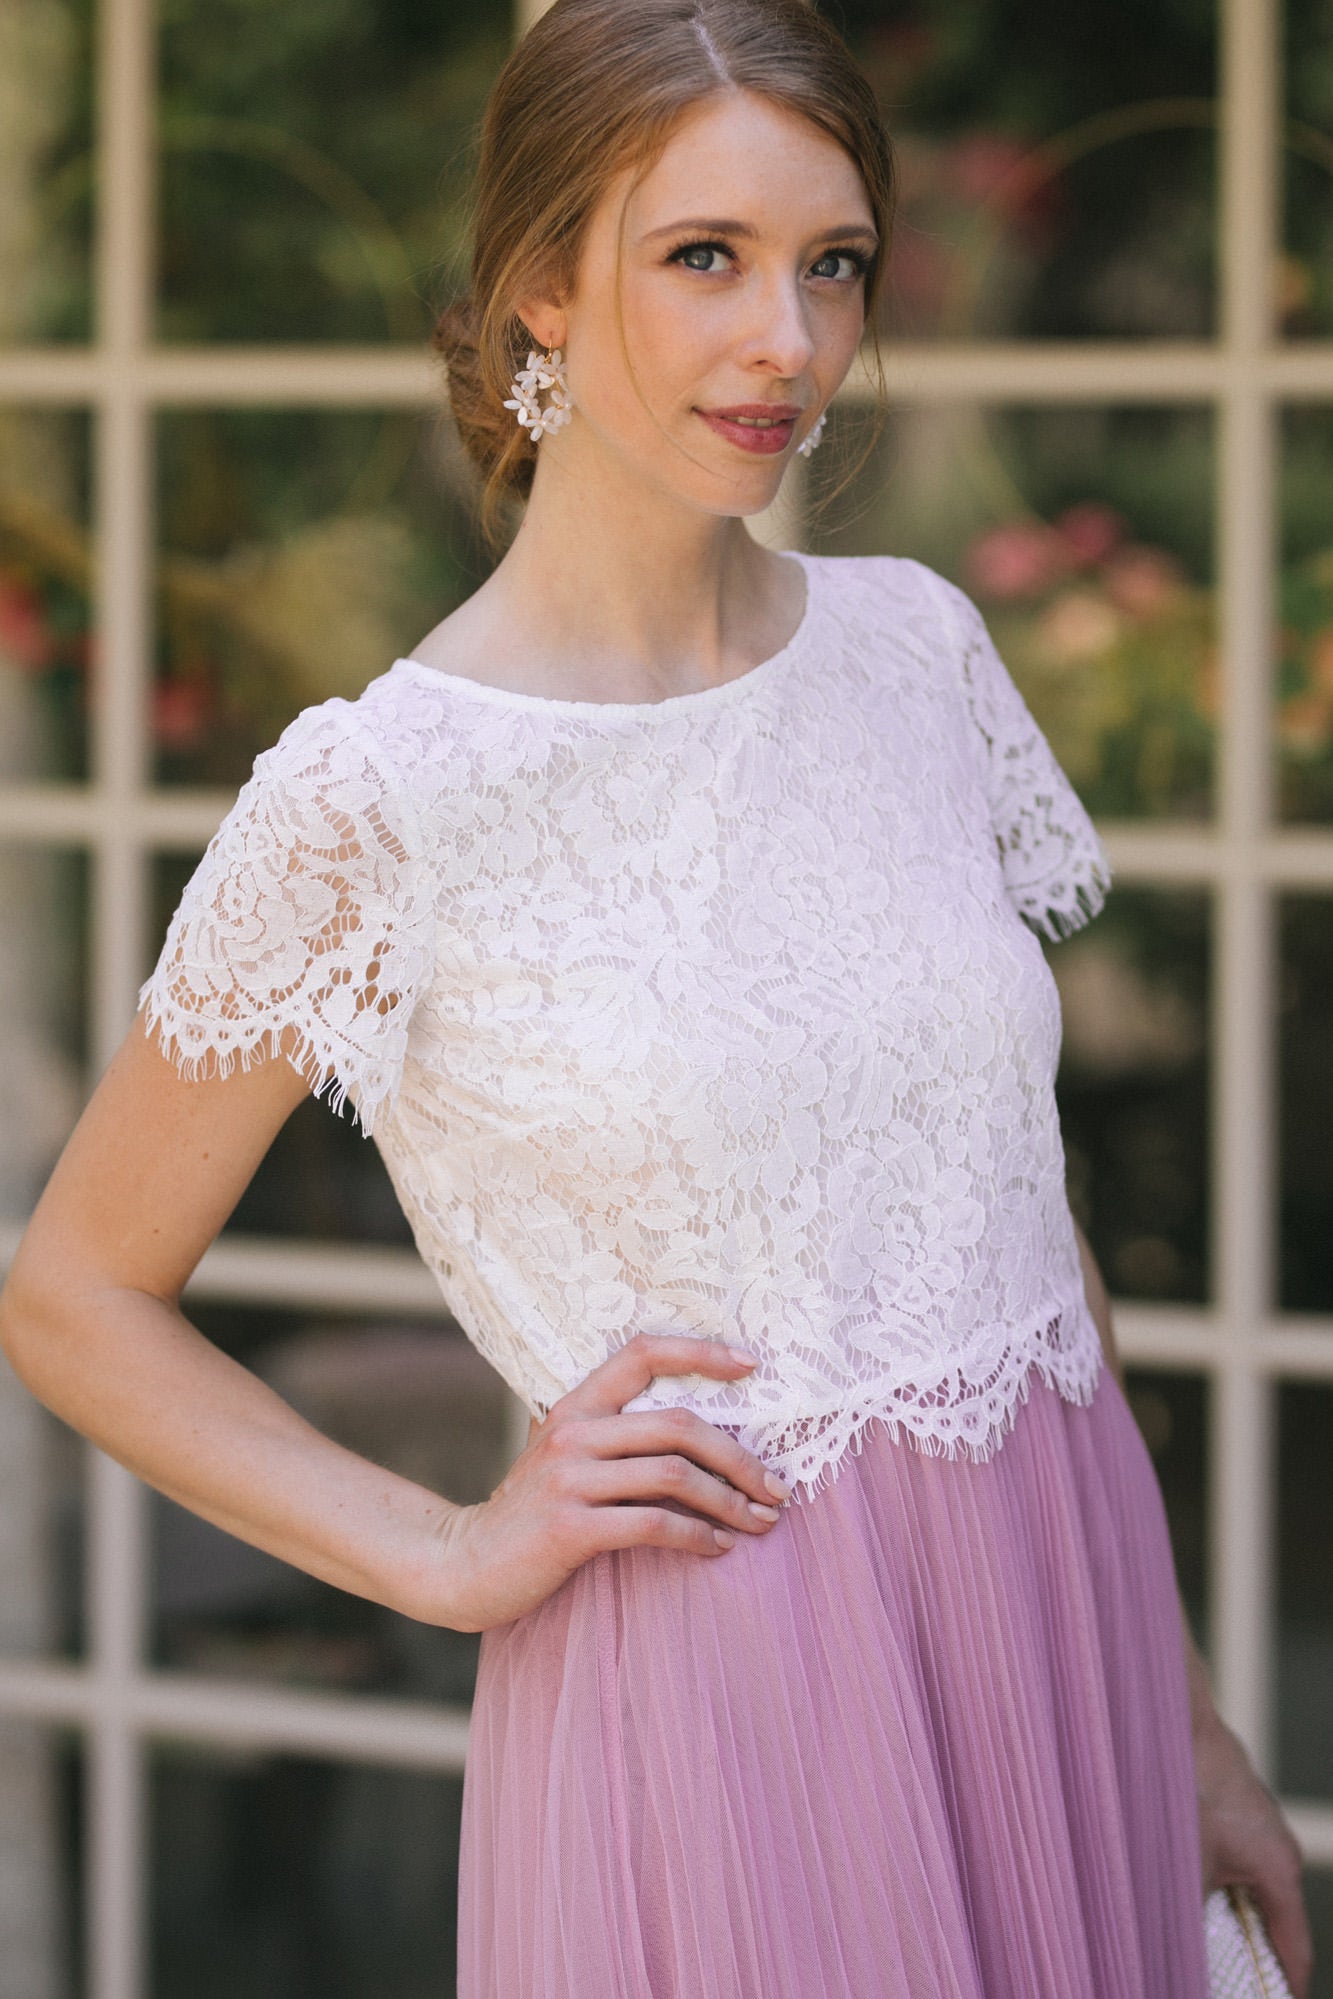 Cute Lace Tops, Bridesmaids Lace Tops - Morning Lavender